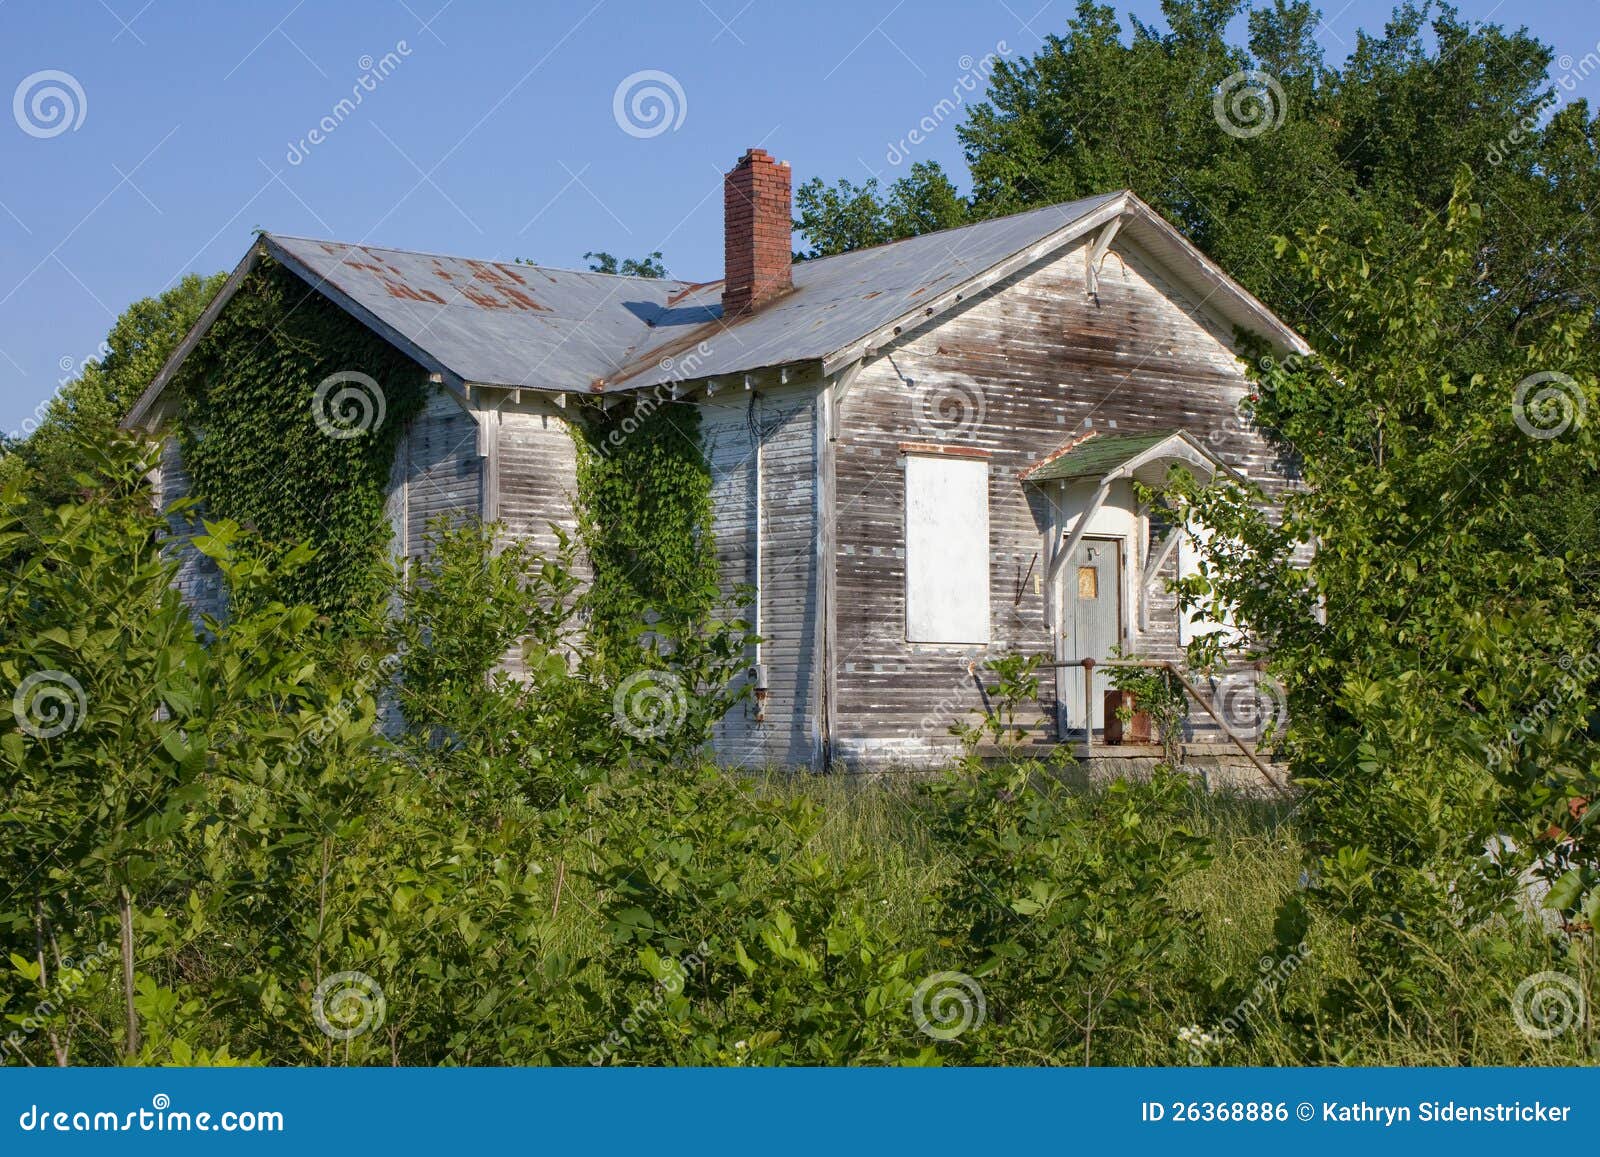 abandoned rural one room schoolhouse